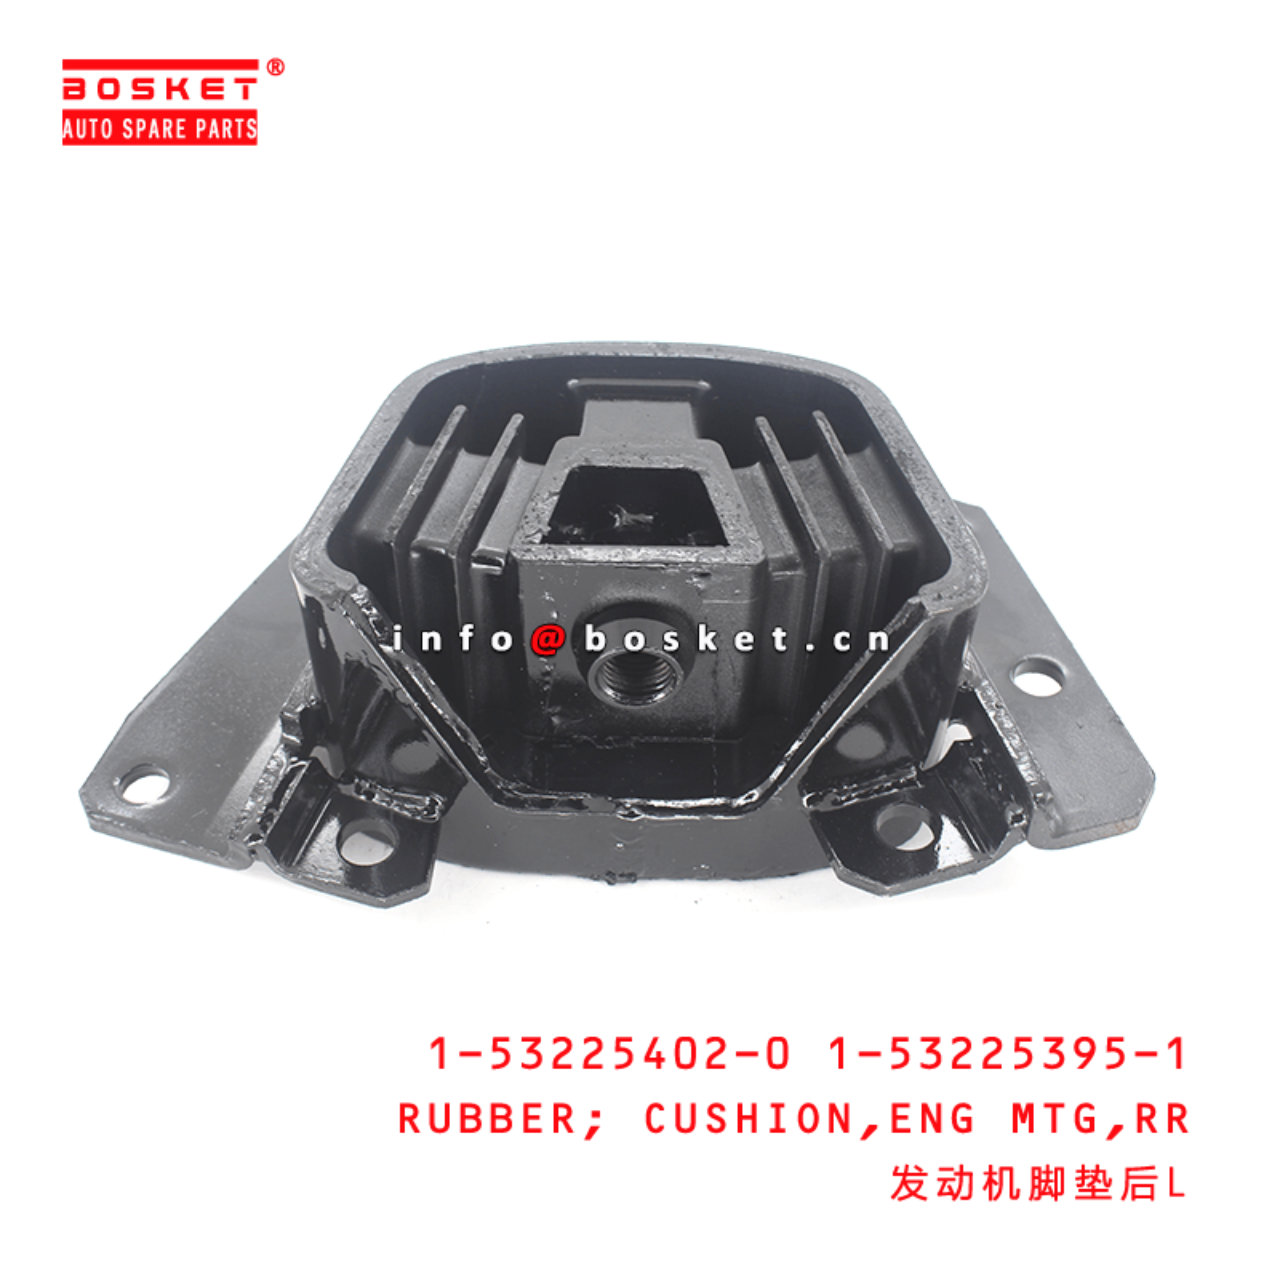 1-53225402-0 1-53225395-1 Rear Engine Mounting Cushion Rubber 1532254020 1532253951 Suitable for ISU